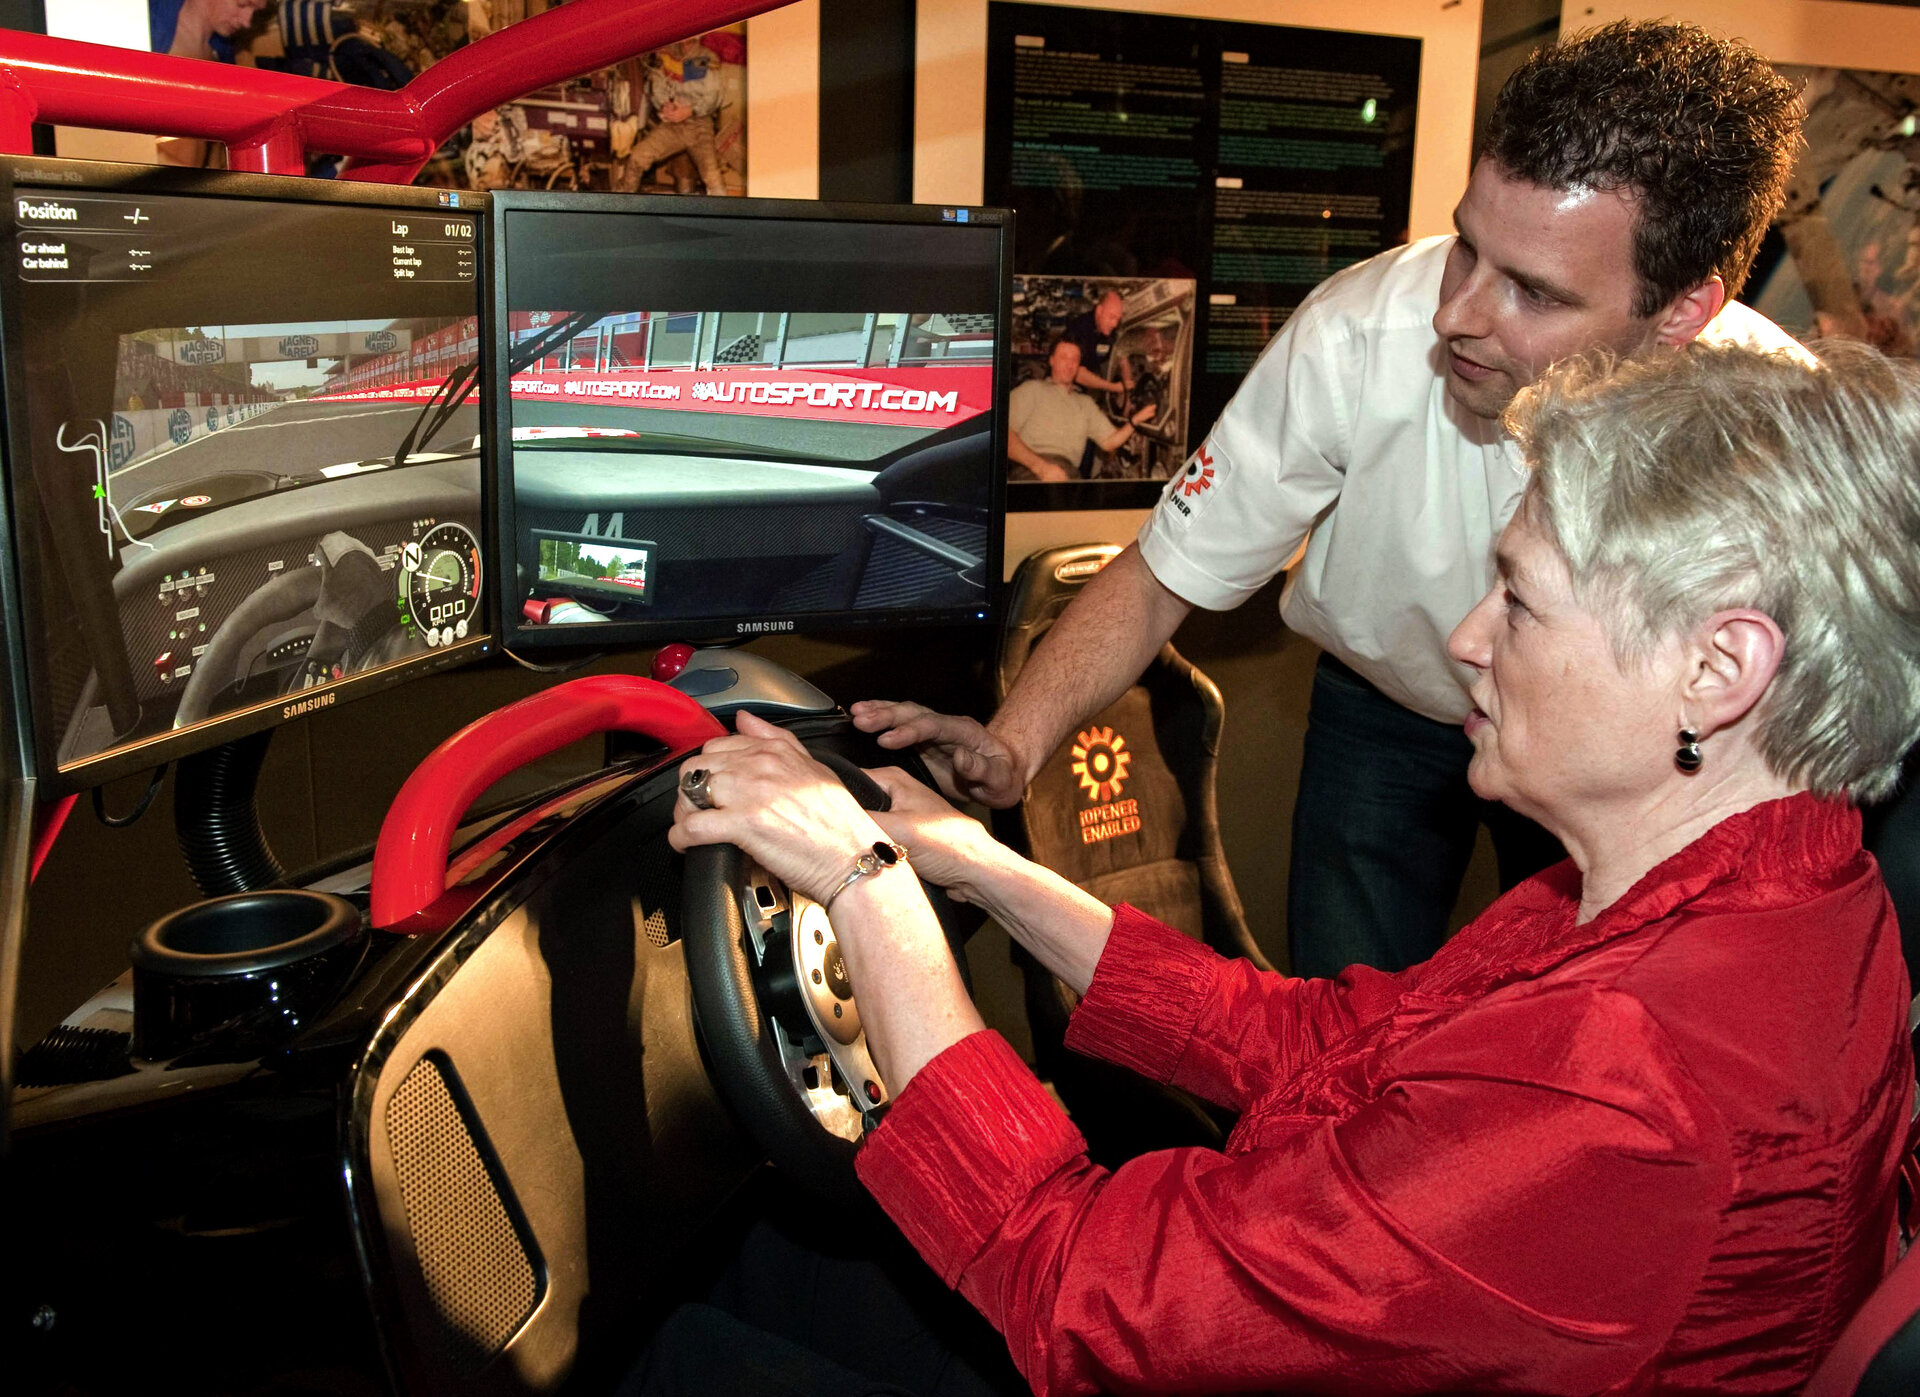 Minister tries spin-off racing game